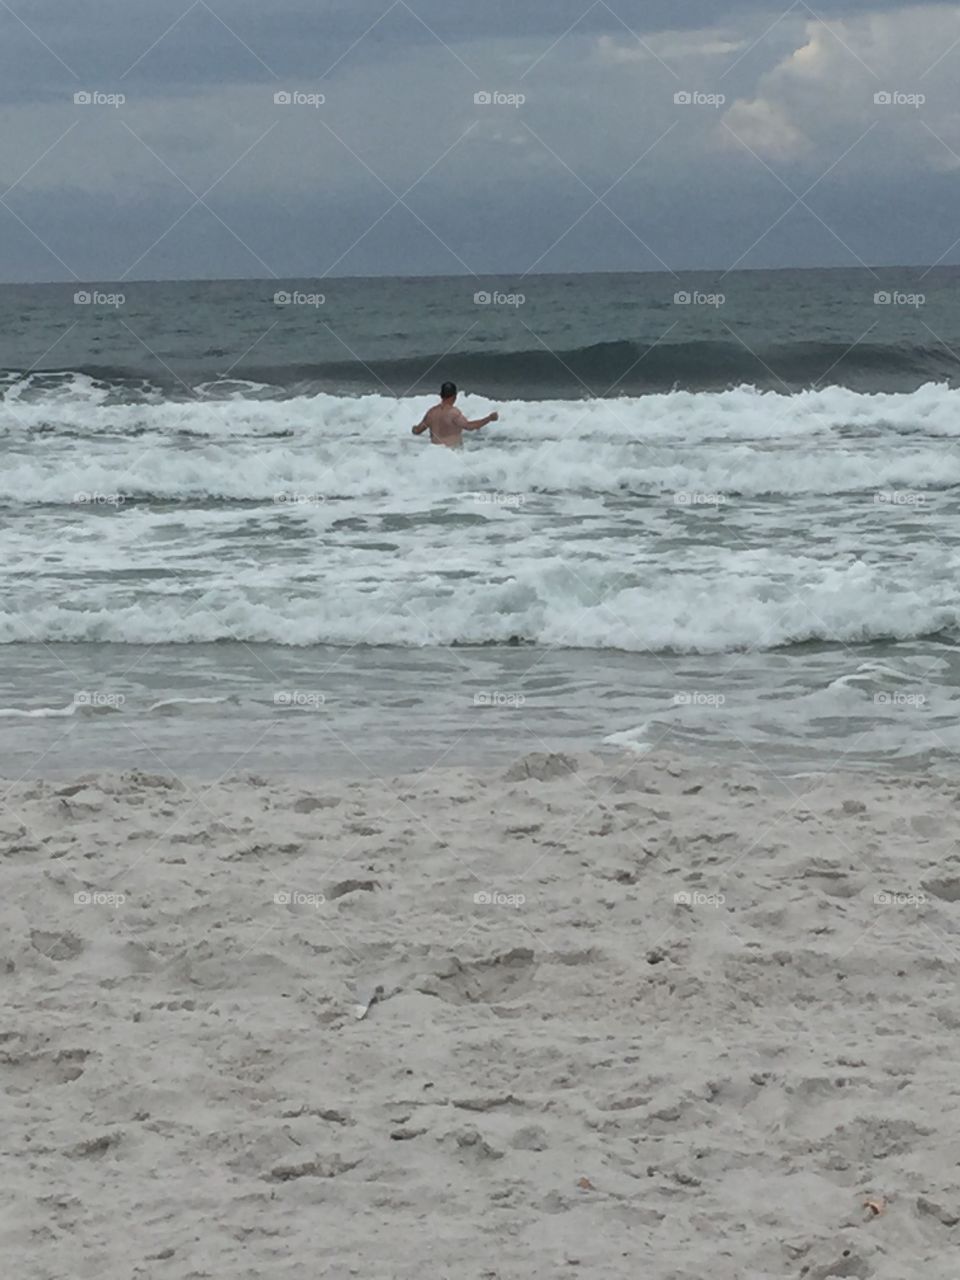 Watching my husband act like a big kid in the water in our first trip to the beach after moving to Florida